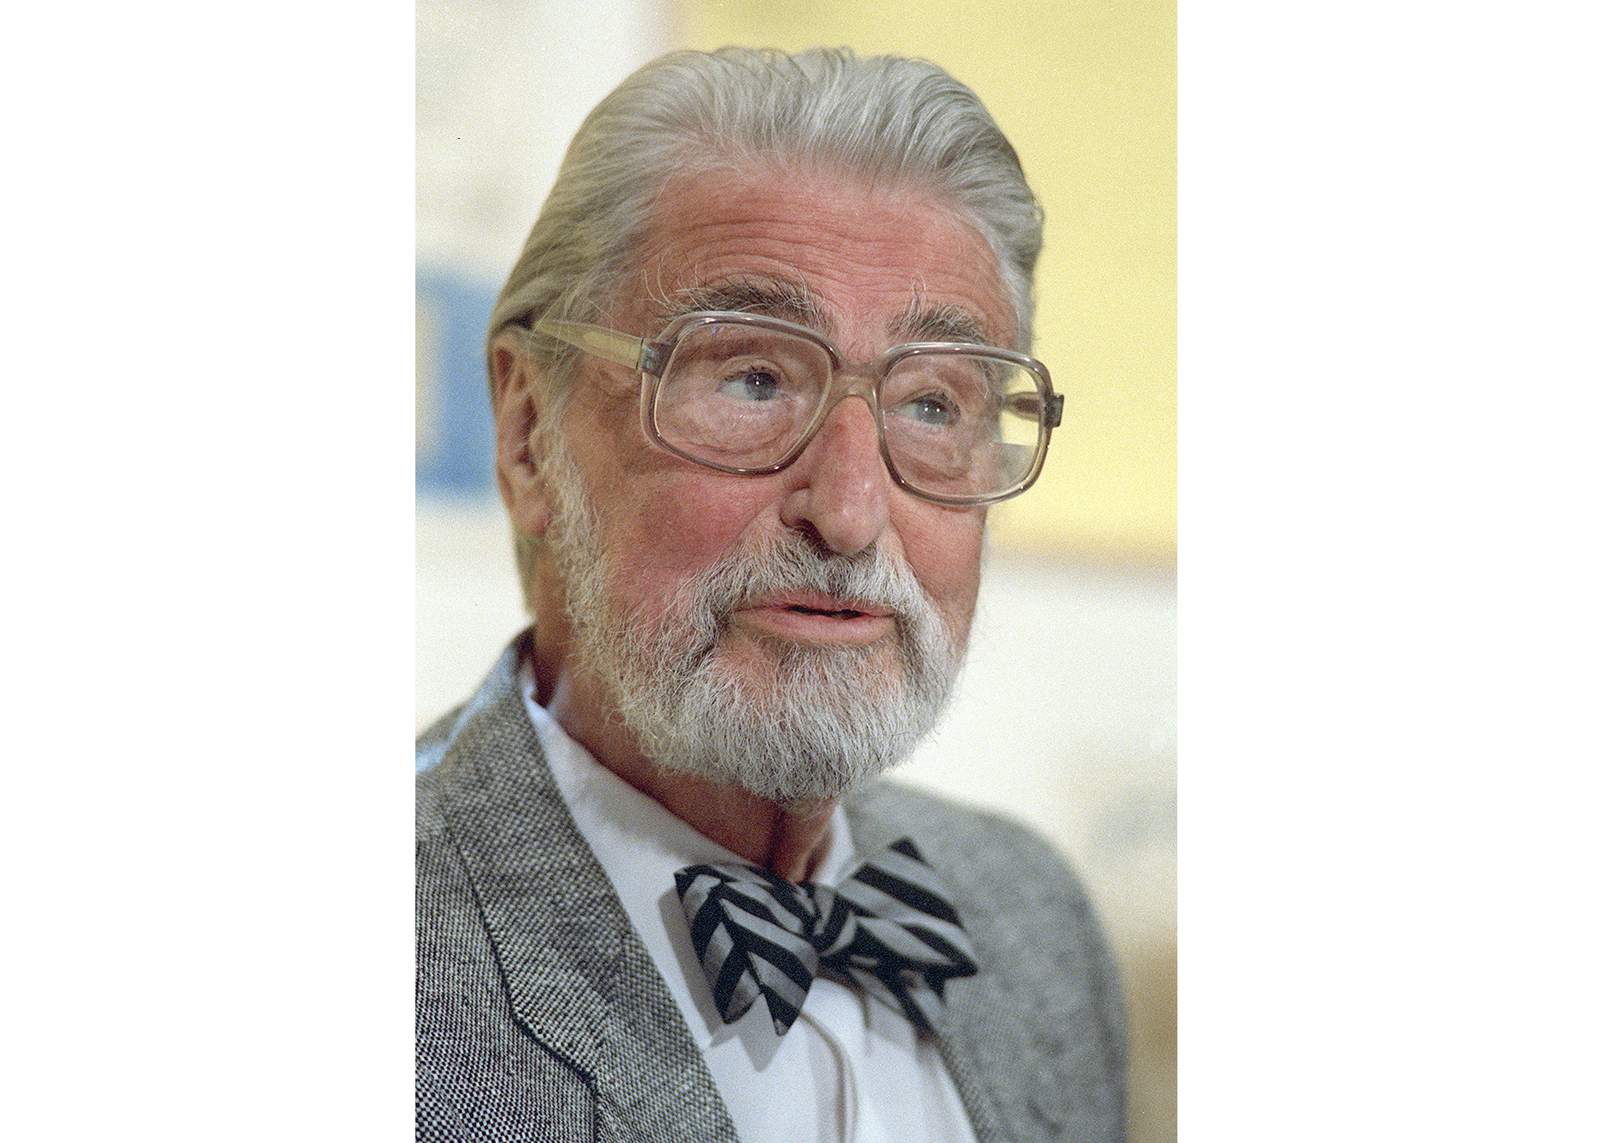 Oh, what a birthday week for Dr. Seuss books